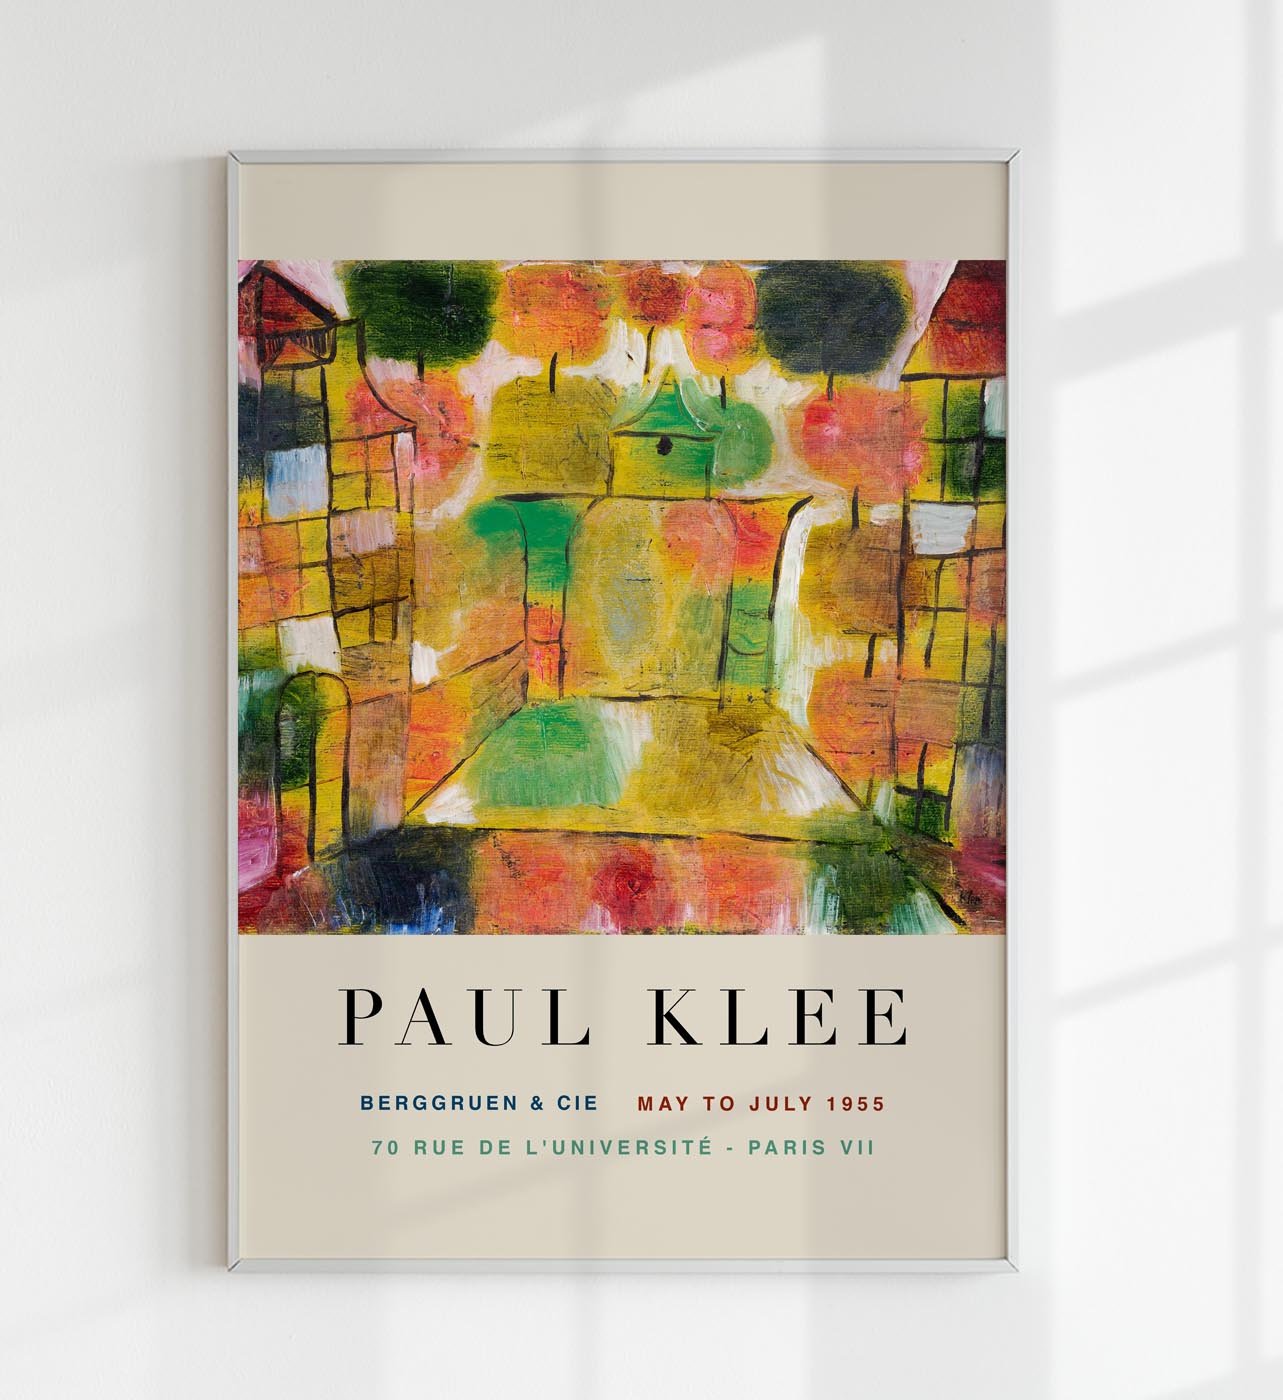 Paul Klee Tree and Architecture Art Exhibition Poster